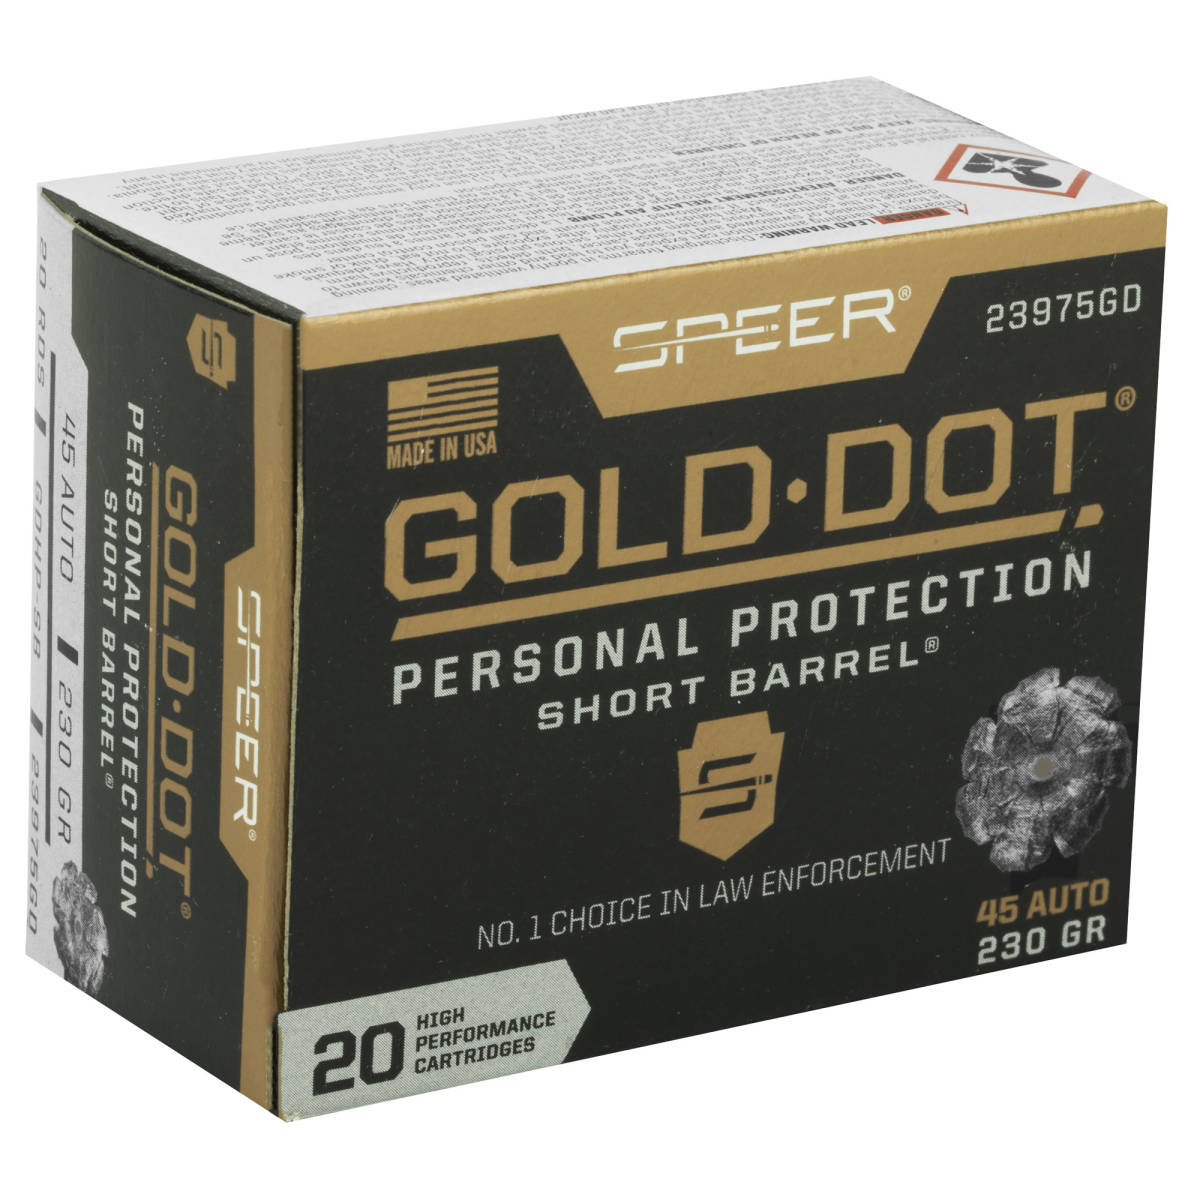 Speer 23975GD Gold Dot Personal Protection Short Barrel 45 ACP 230 gr...-img-1